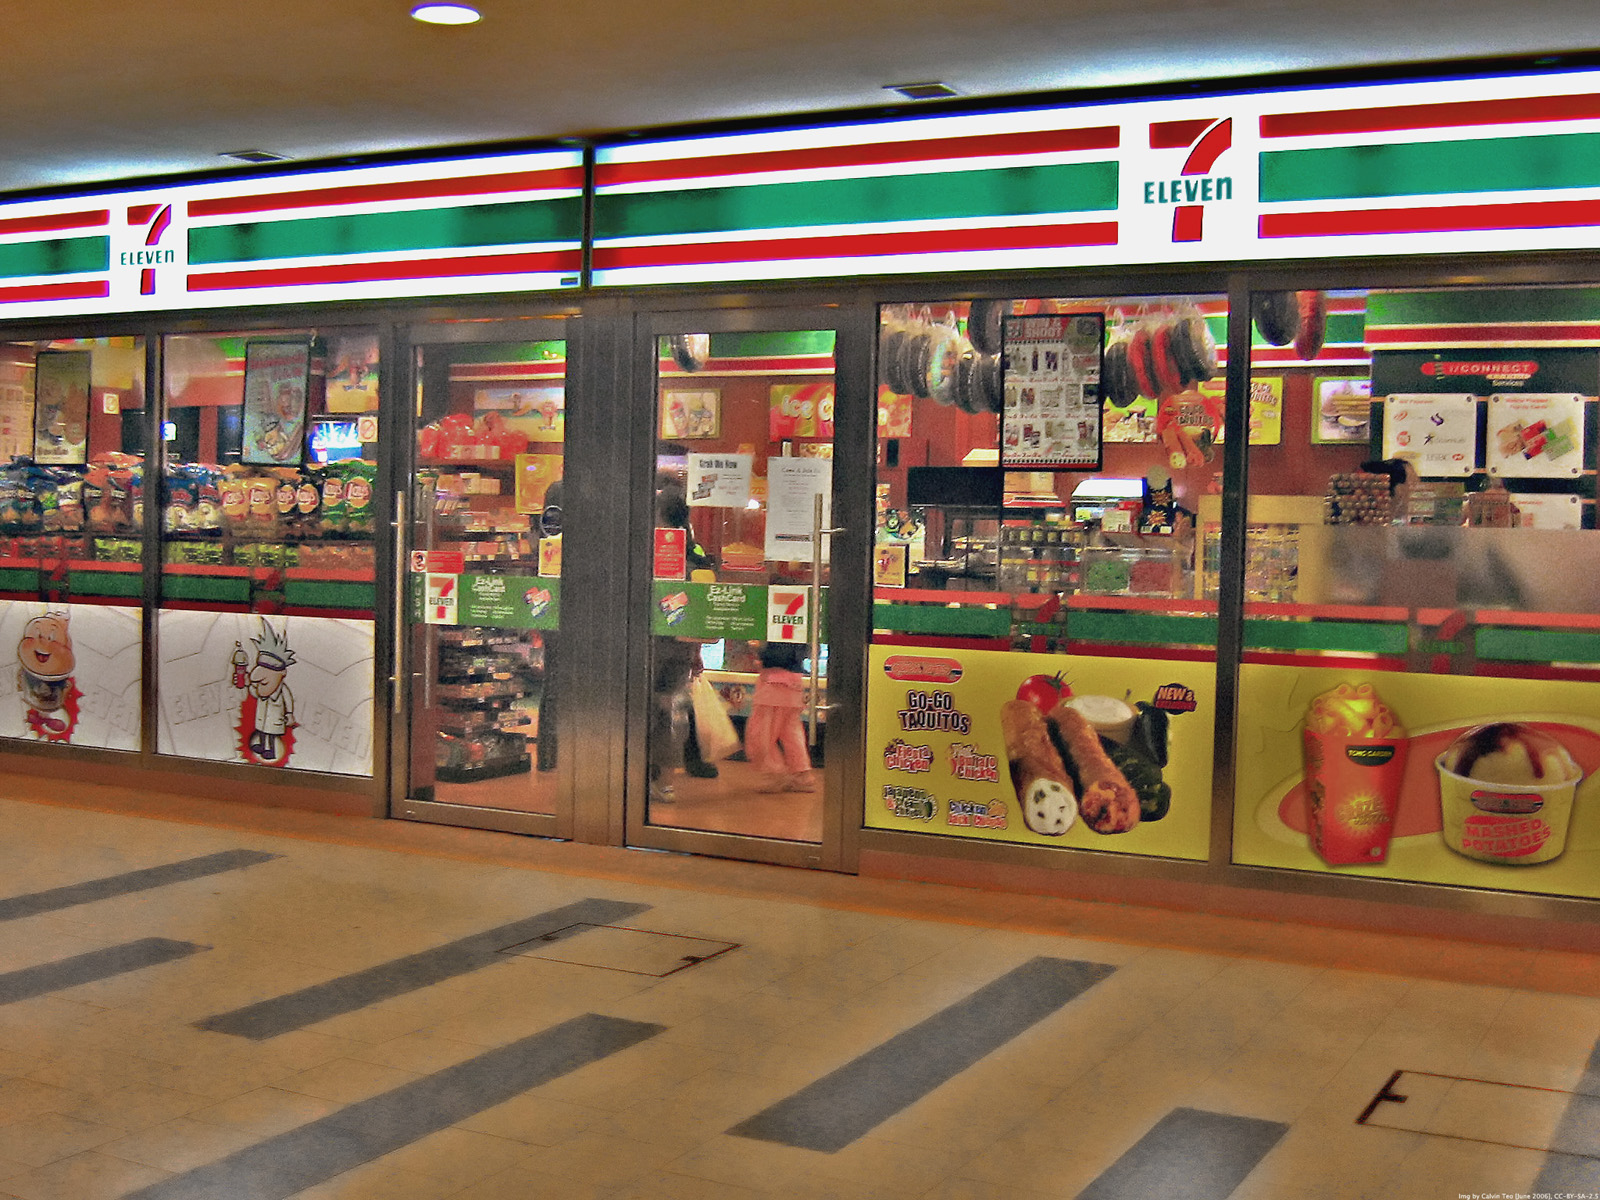  7  Eleven  Convenience  Store  Franchise in the Philippines 